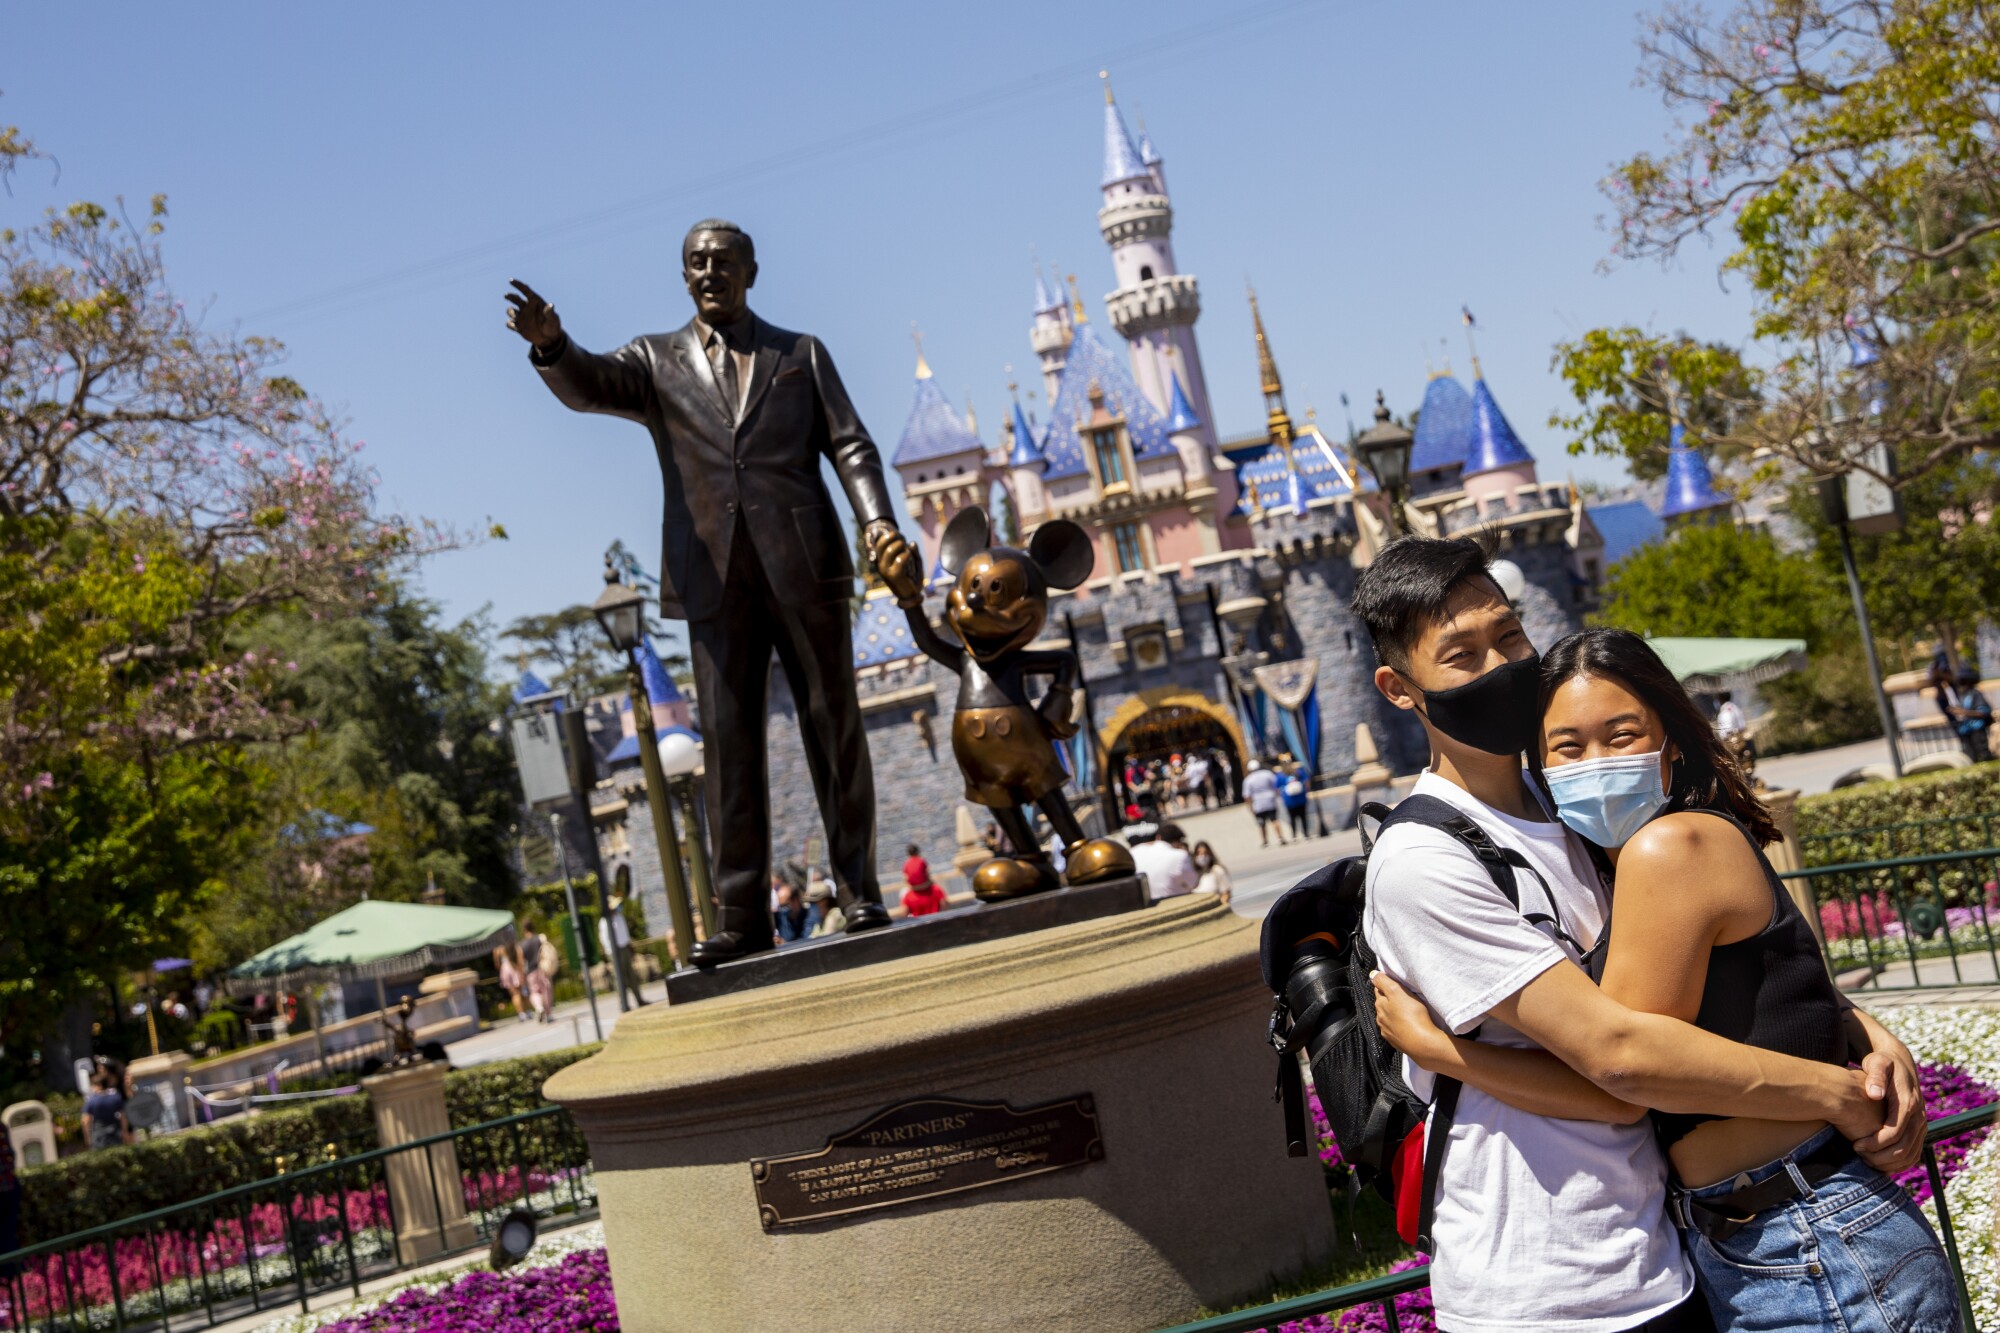 In the first days of Disneyland's reopening last year, masks were required and the park operated at 25% capacity. 